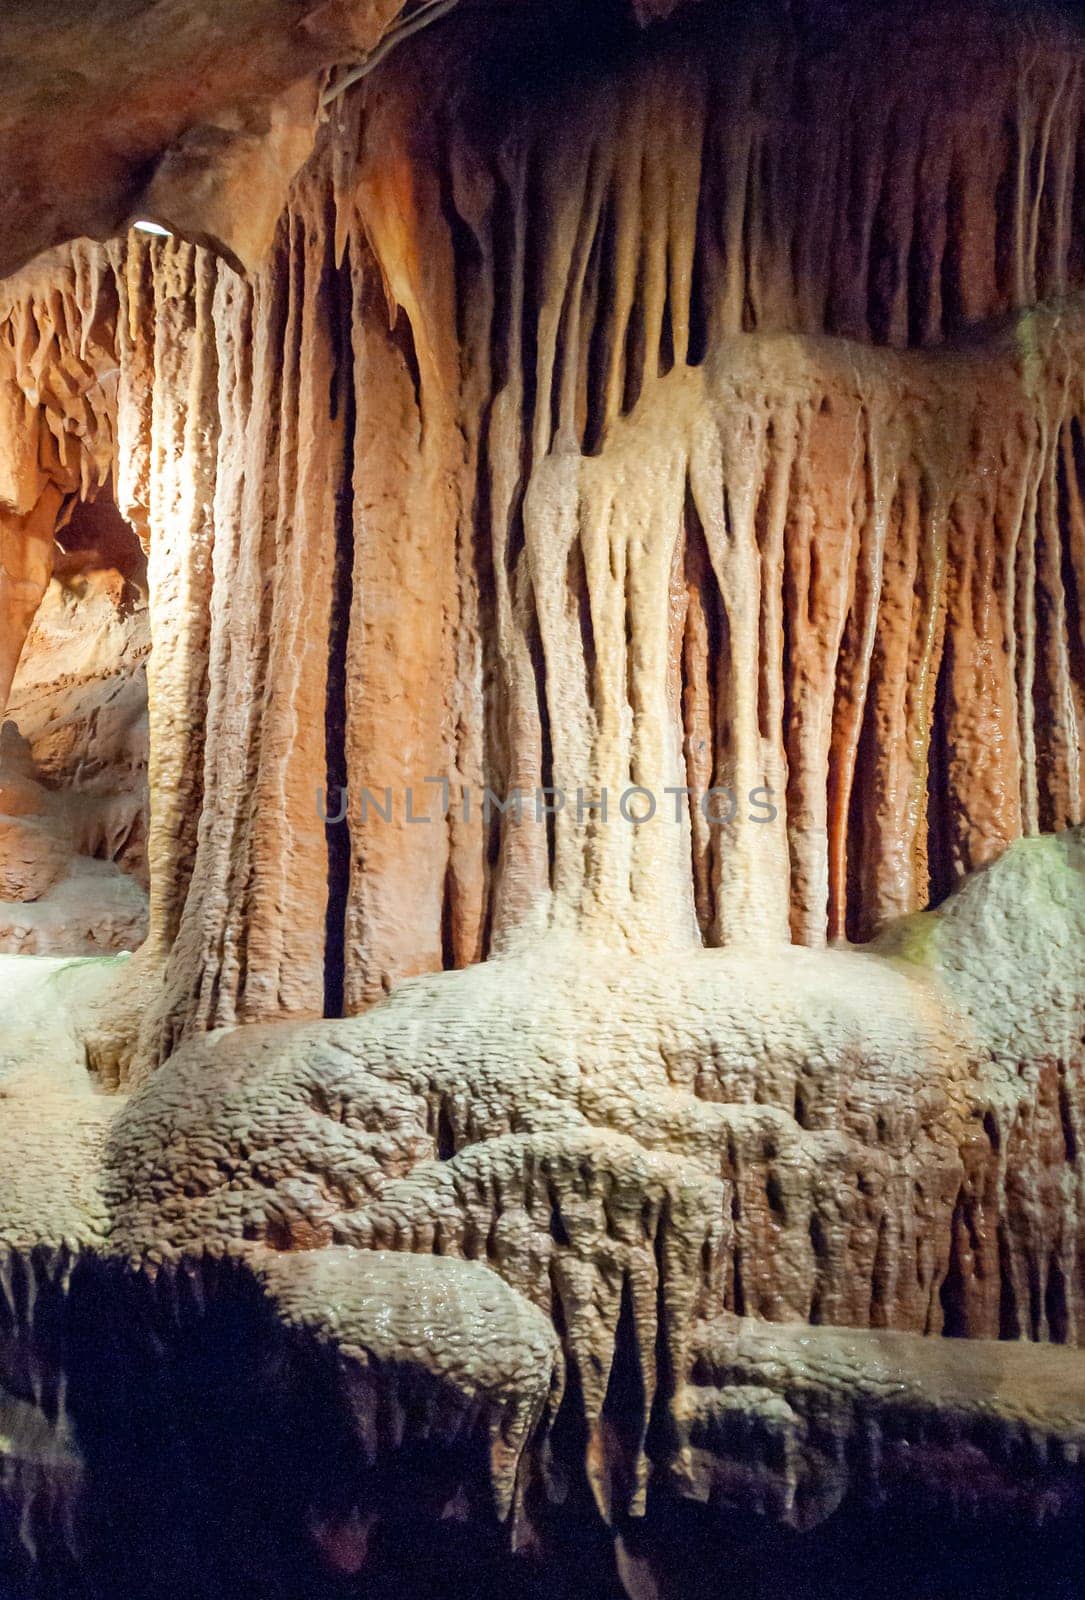 Calcite inlets, stalactites and stalagmites in large underground halls in Carlsbad Caverns NP, New Mexico